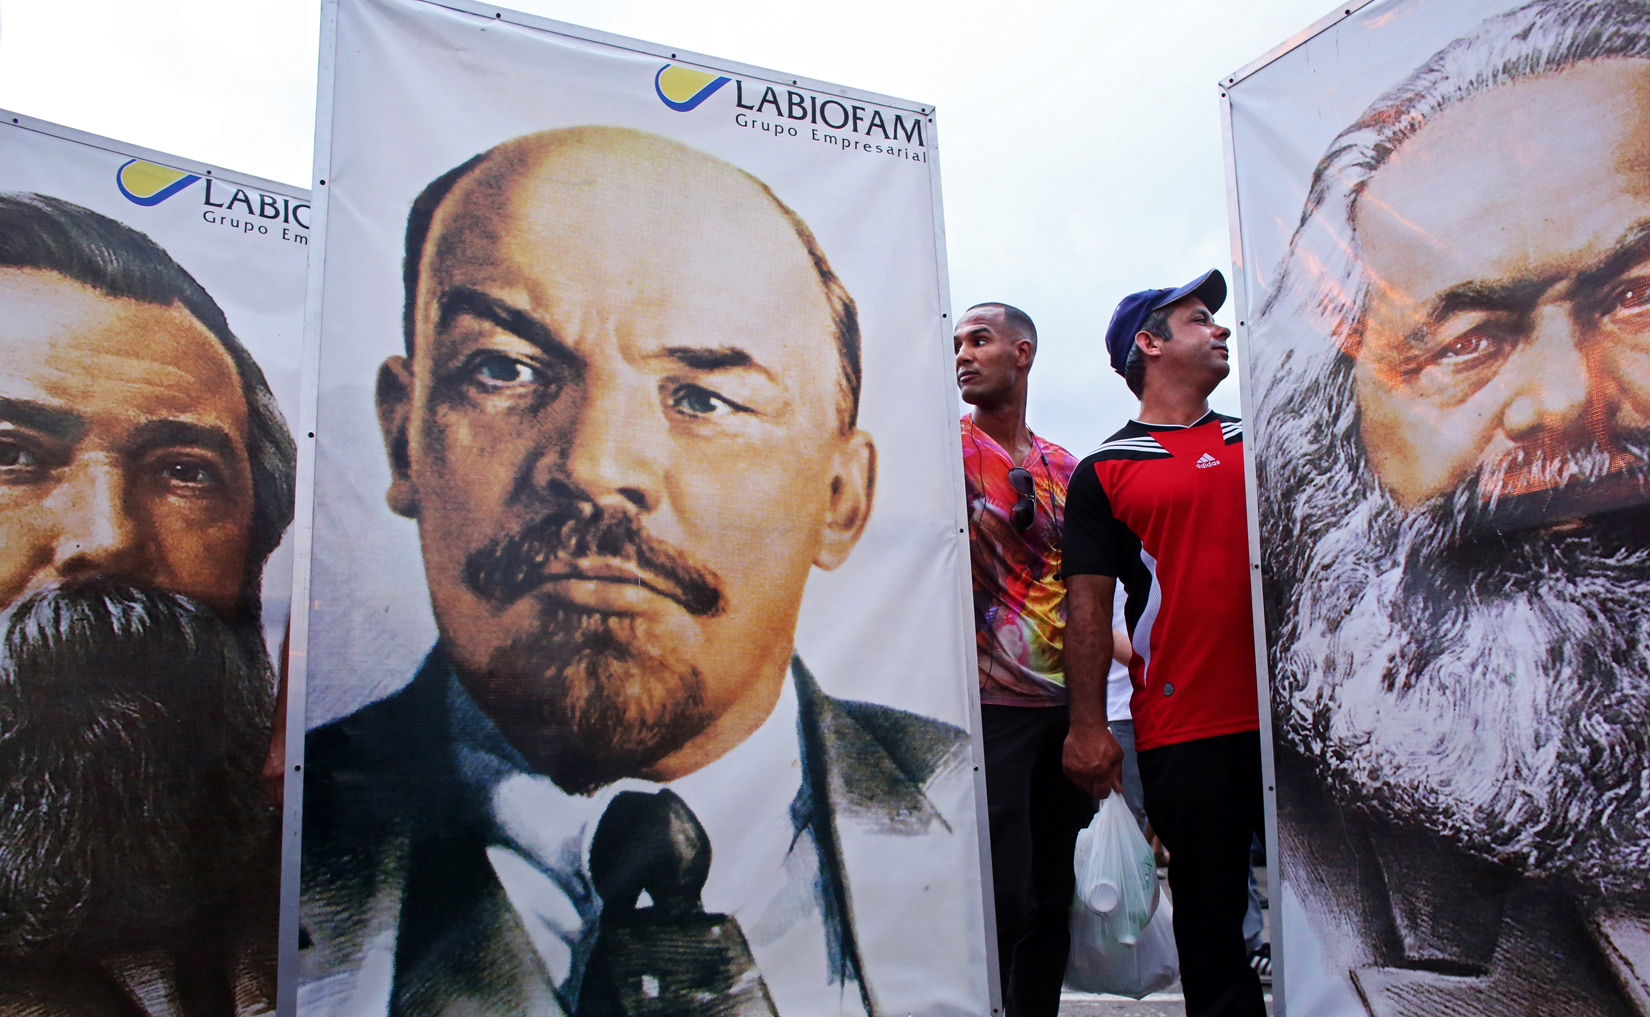 (L-R) Participants in the 1st of May Labor Day parade march in Havana, Cuba, hold signs of German Communist revolutionary Friedrich Engels, Russian Communist leader Vladimir Lenin and German Communist revolutionary Karl Marx. In Cuba, the day known as Día del Trabajo is a call for people to show support to their socialist government and the Cuban Revolution. Guests worldwide are known to join. While attendance is not mandatory, absence from the march is usually noted and discouraged. I recall the communist years Labor Day marches of Bulgaria quite well: much like in the Cuba of today, groups of people huddled with their co-workers in the early a.m hours, attendance to be accounted for by their boss - or face social, and often professional, retribution.  